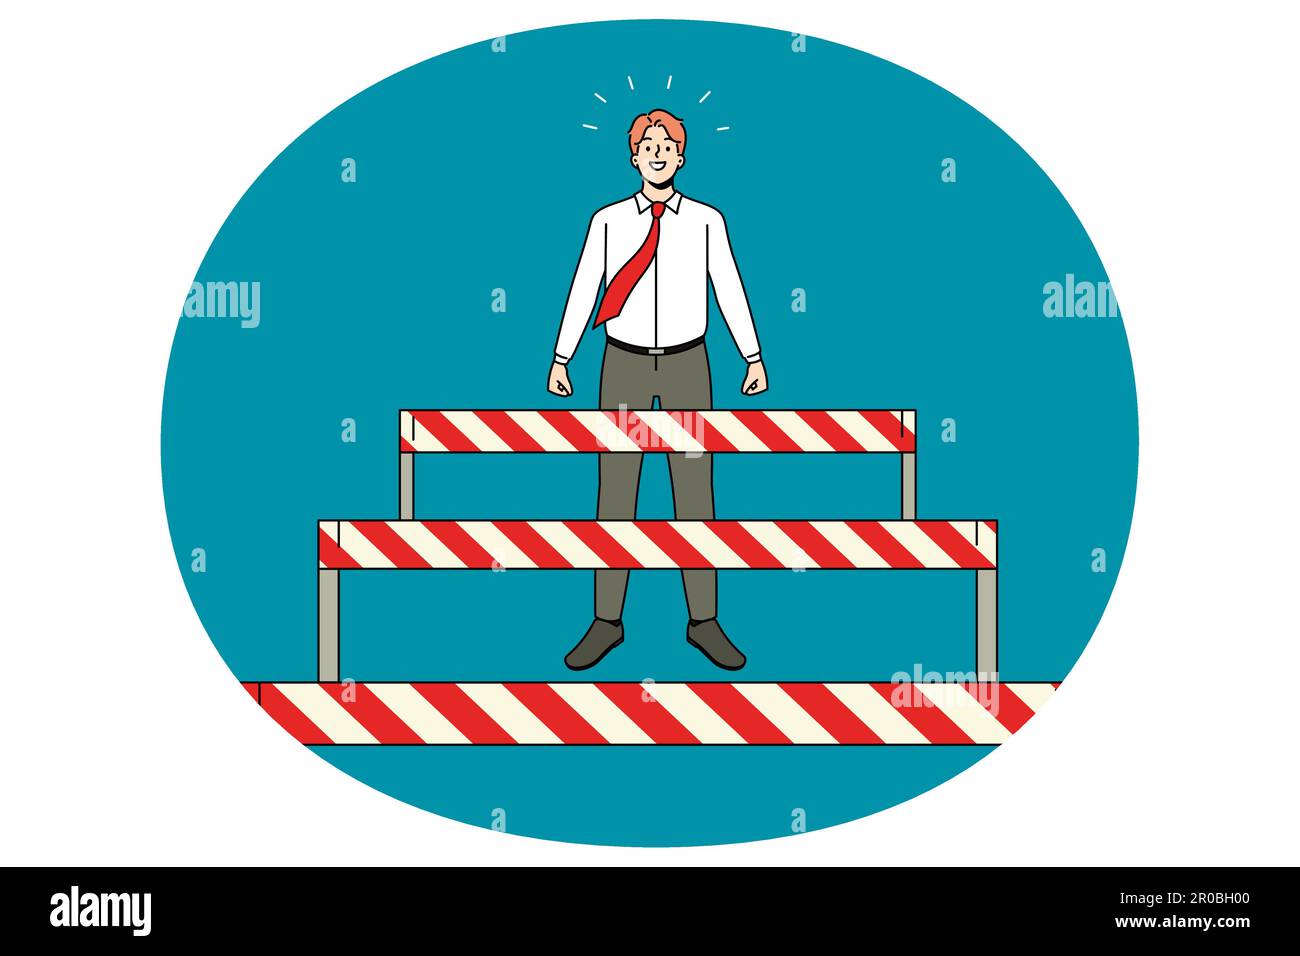 Businessman stand overcome obstacles on way to career or work success. Motivated happy man employee pass barriers to achievement. Challenge and accomplishment. Vector illustration. Stock Vector